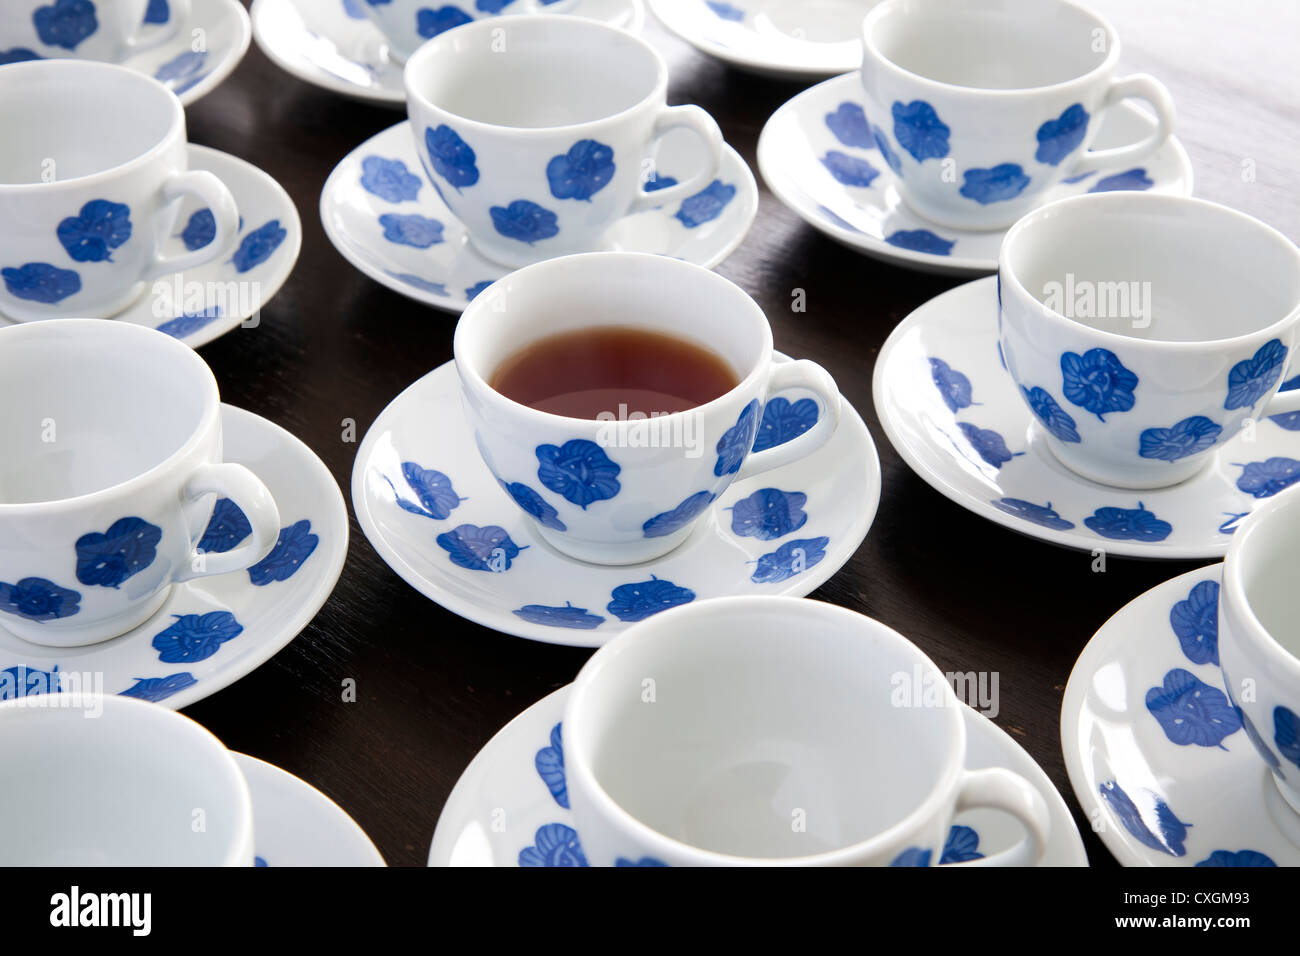 One cup of tea in blue and white teacup, surrounded by empty teacups. Stock Photo